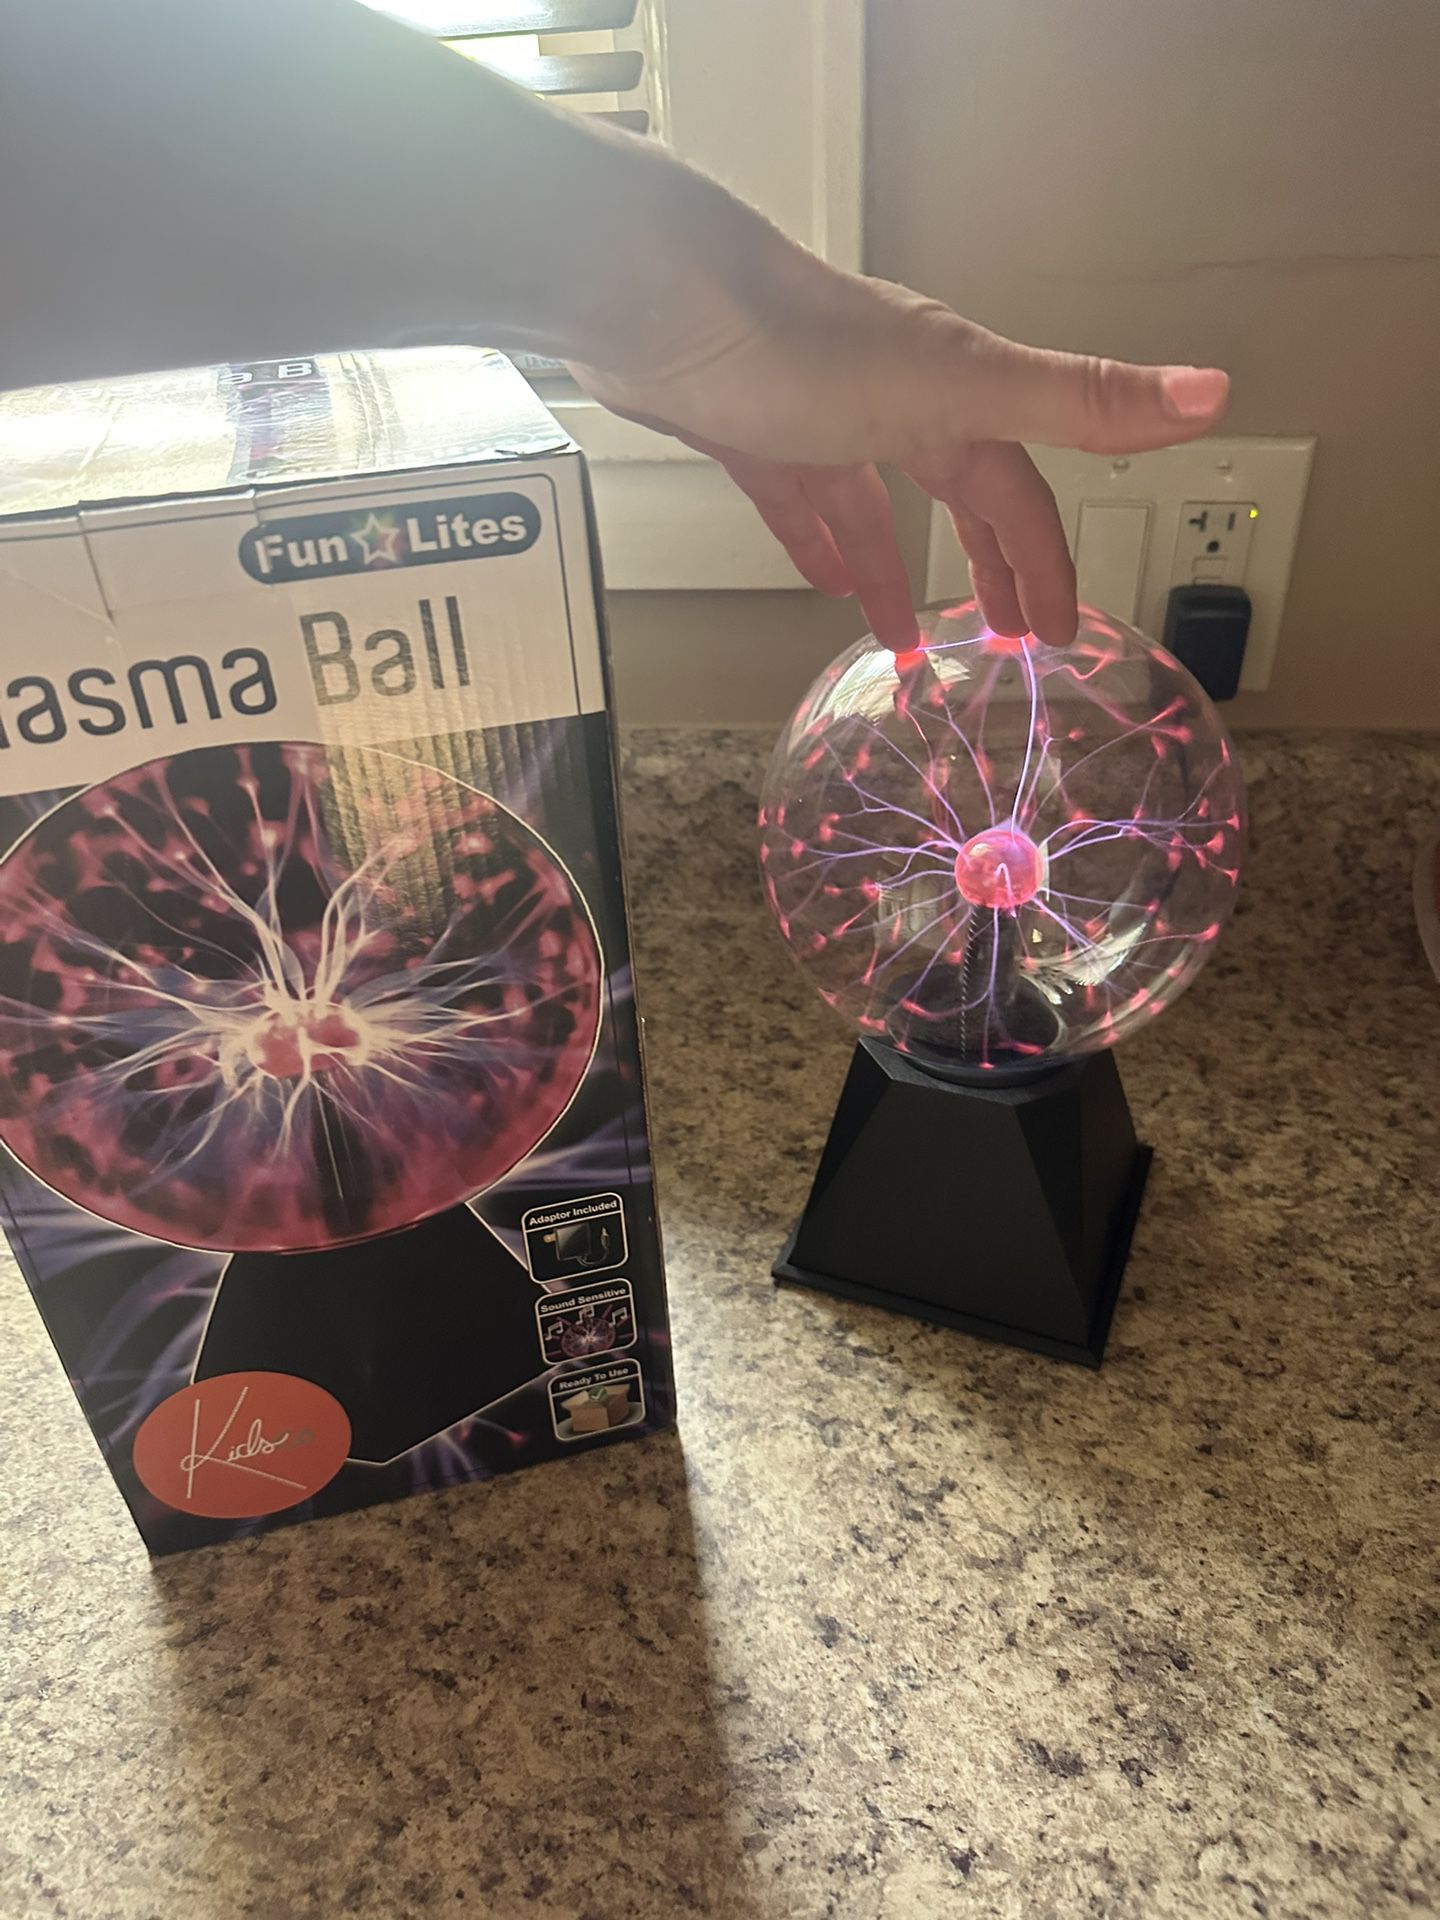 NEW PLASMA BALL plugged In To Show It Works It Is 11 Inches $50 Plasma Ball